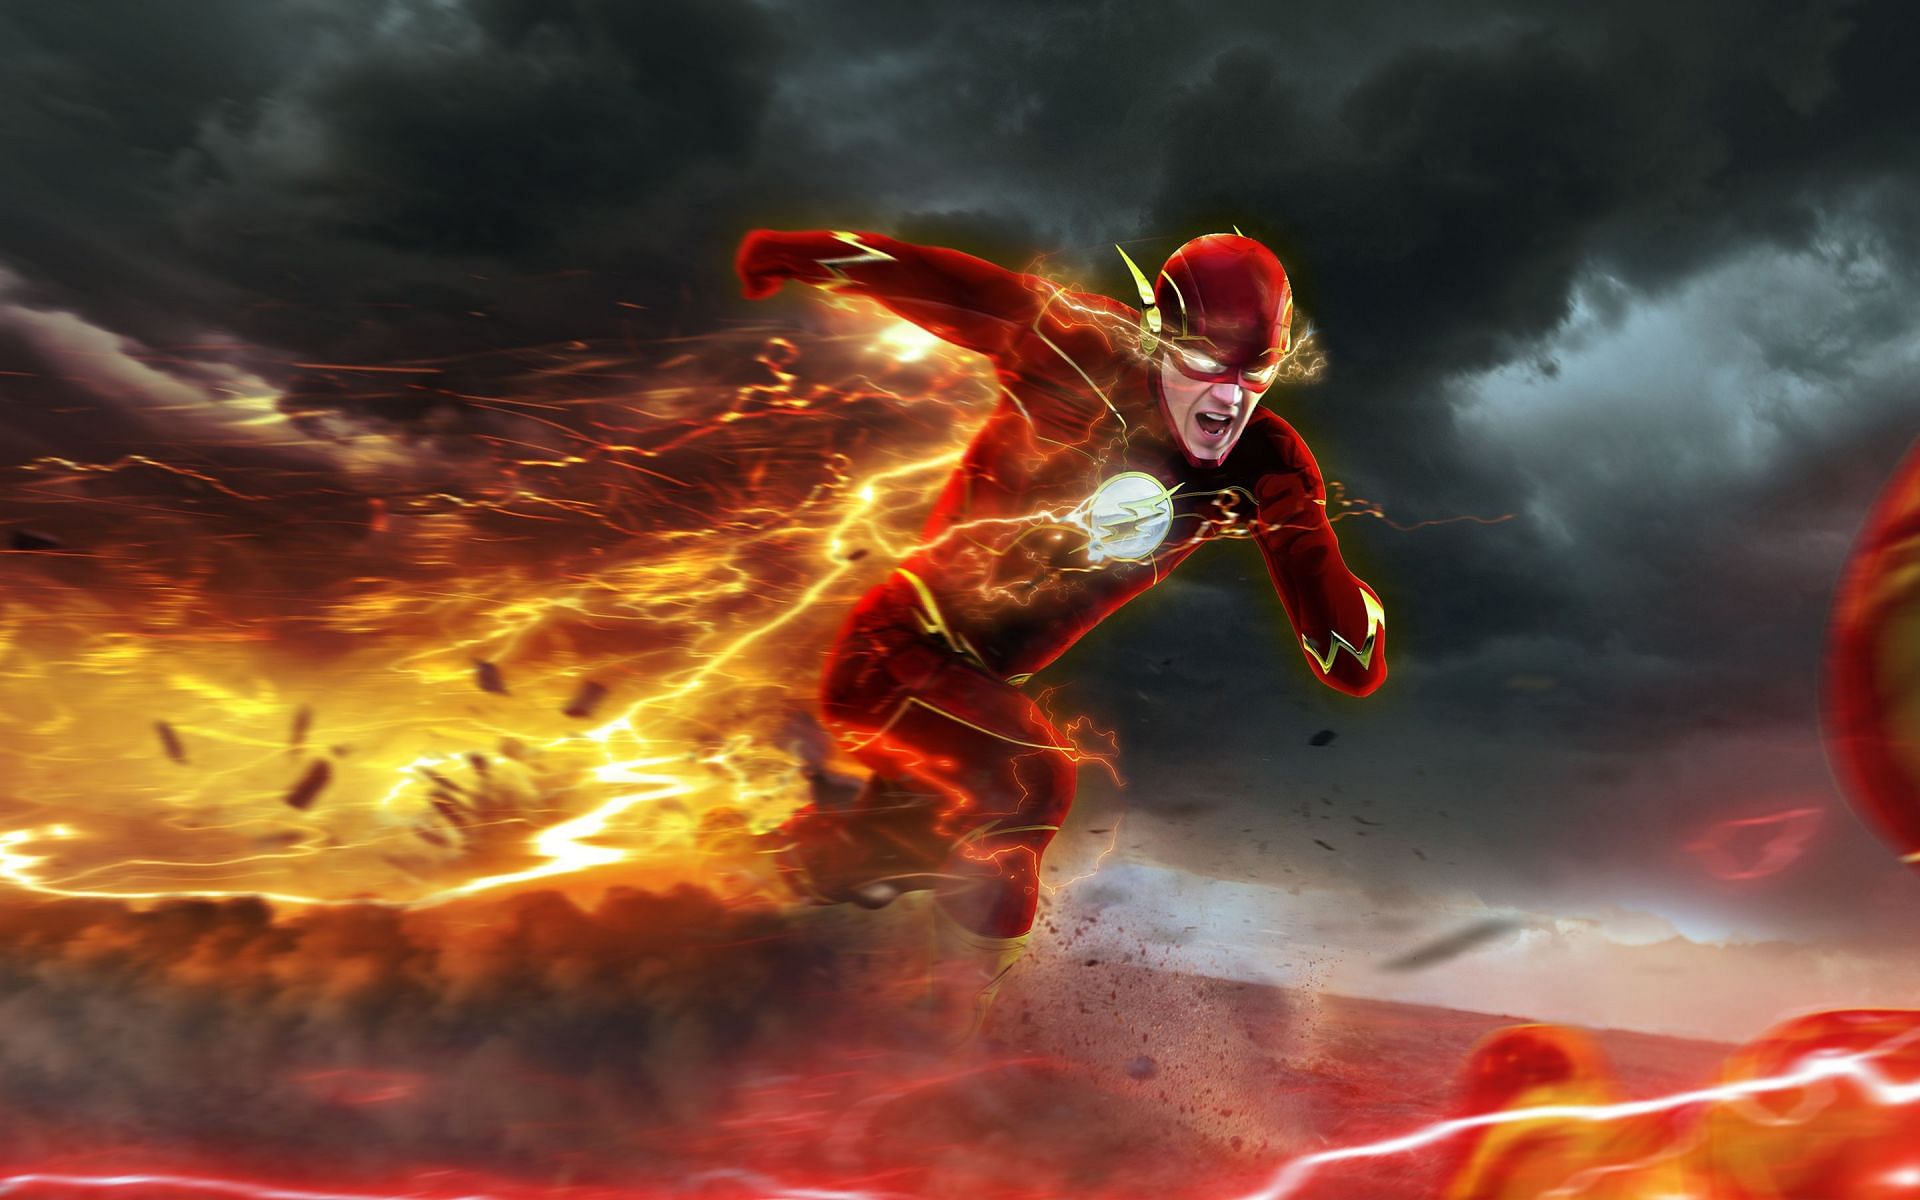 &quot;The Flash&quot; DC movie, featuring Ezra Miller as the lead hero. (Image via DC)